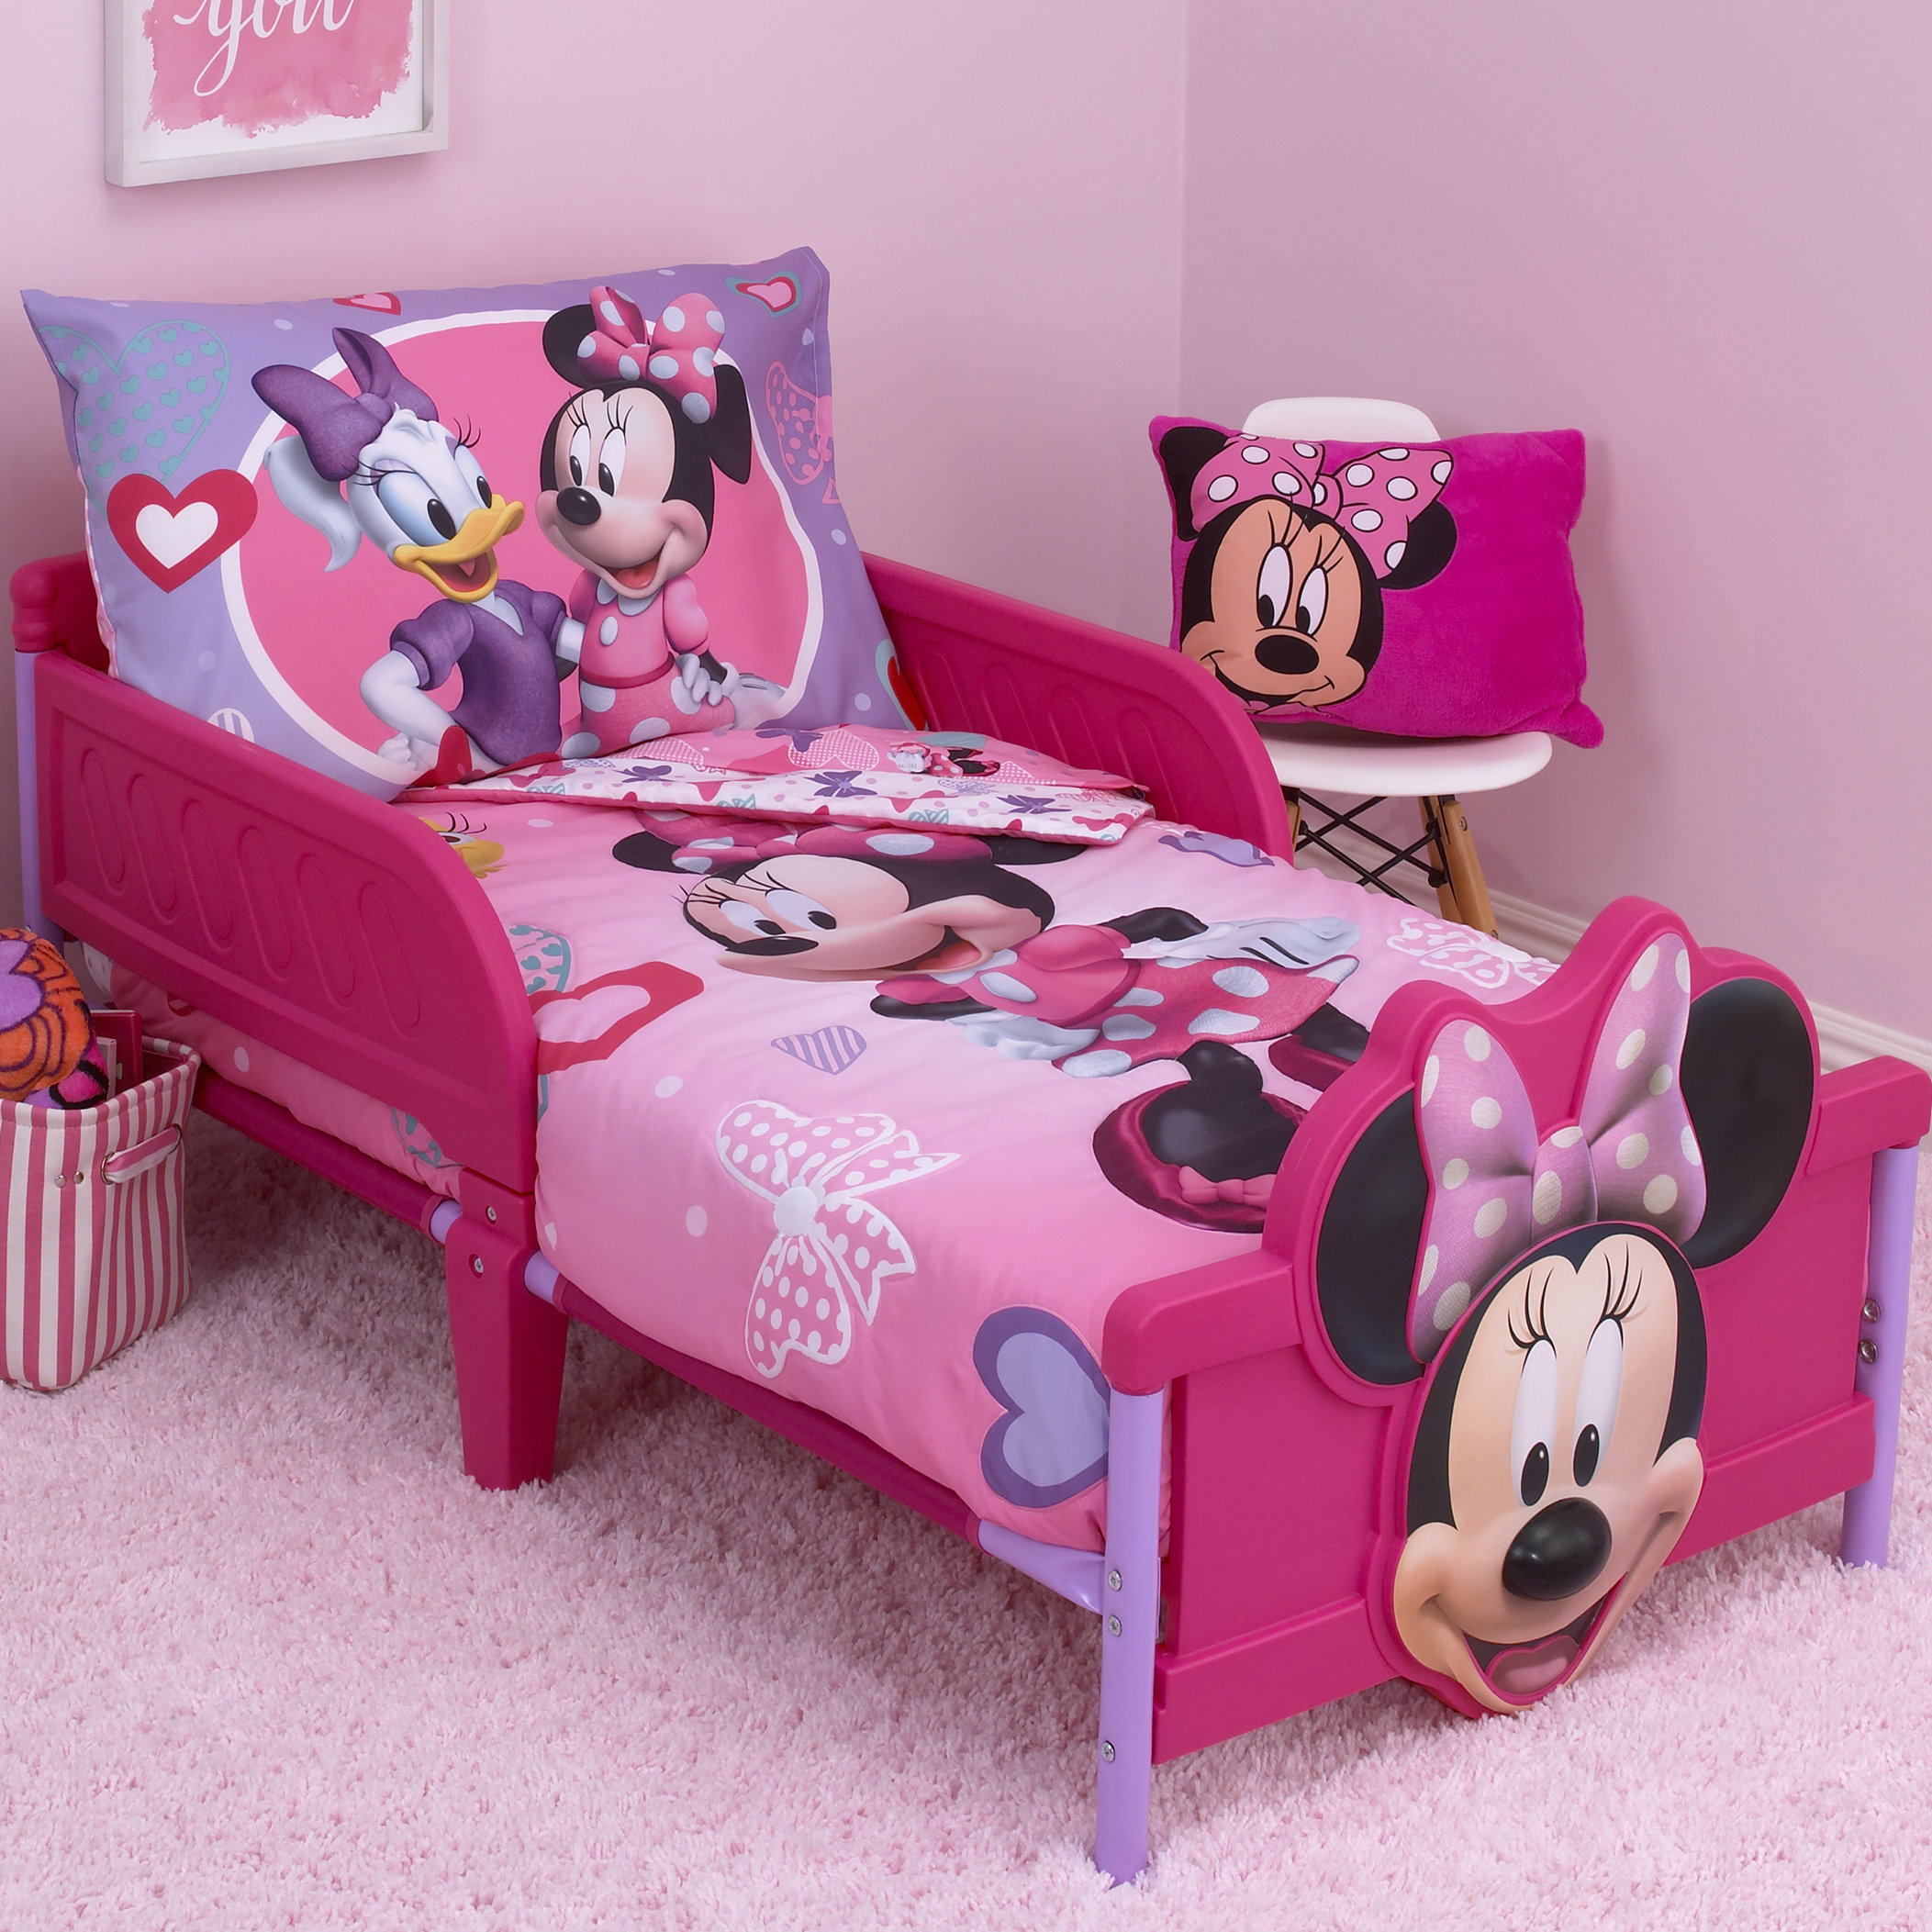 Minnie Mouse Hearts And Bows 4 Piece Toddler Bedding Set intended for size 2105 X 2105